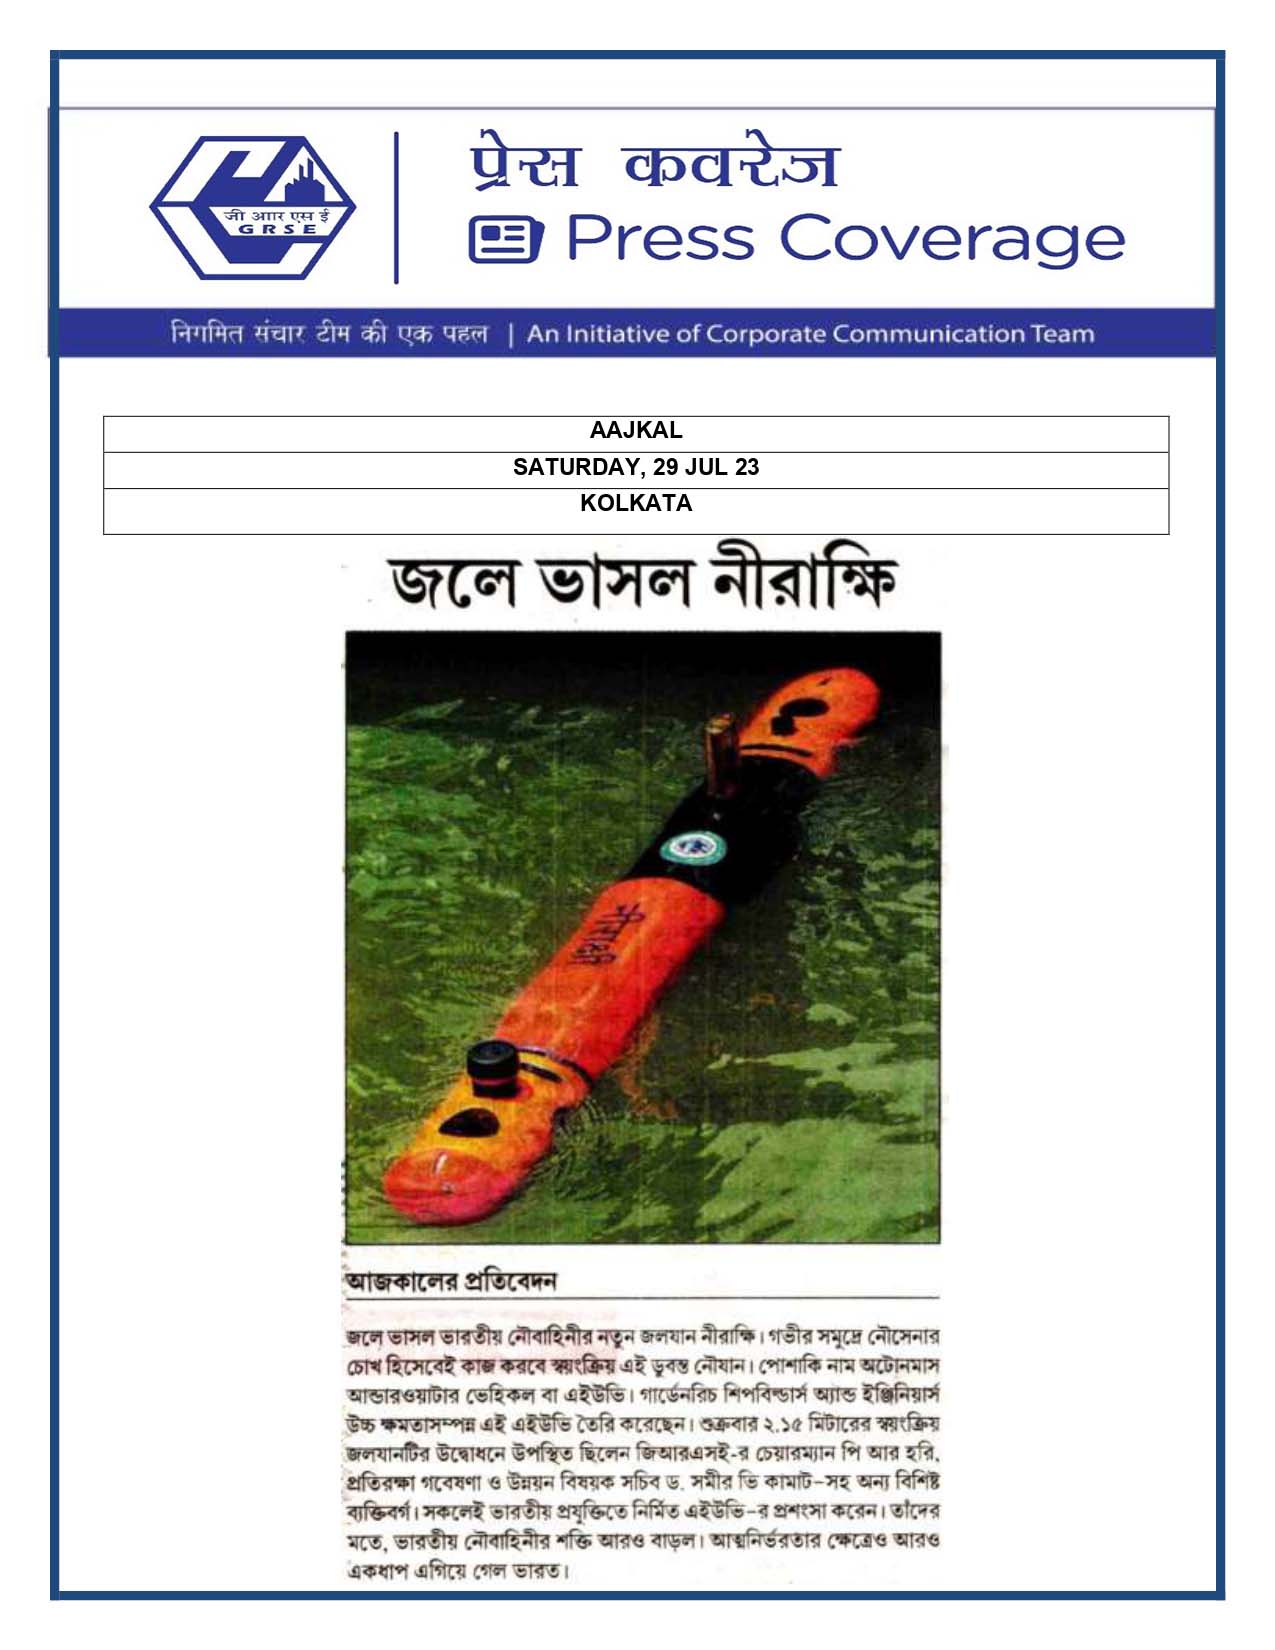 Press Coverage : Aajkal, 29 Jul 23 : Mine Detector AUV Launched